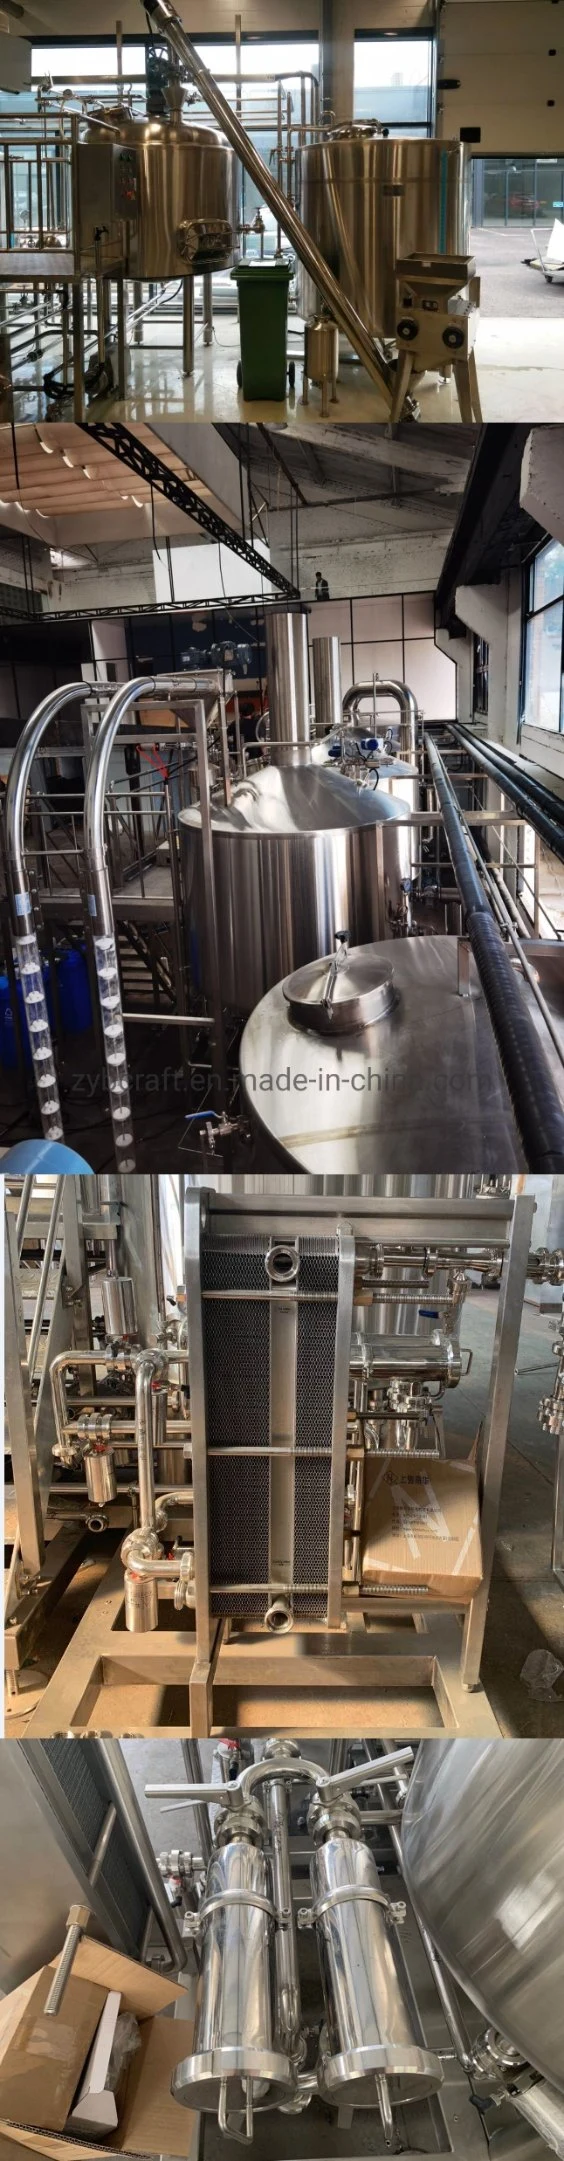 1500L 15hl Commercial Brewery for Sale Turnkey Brewing System Micro Beer Brewery Equipment